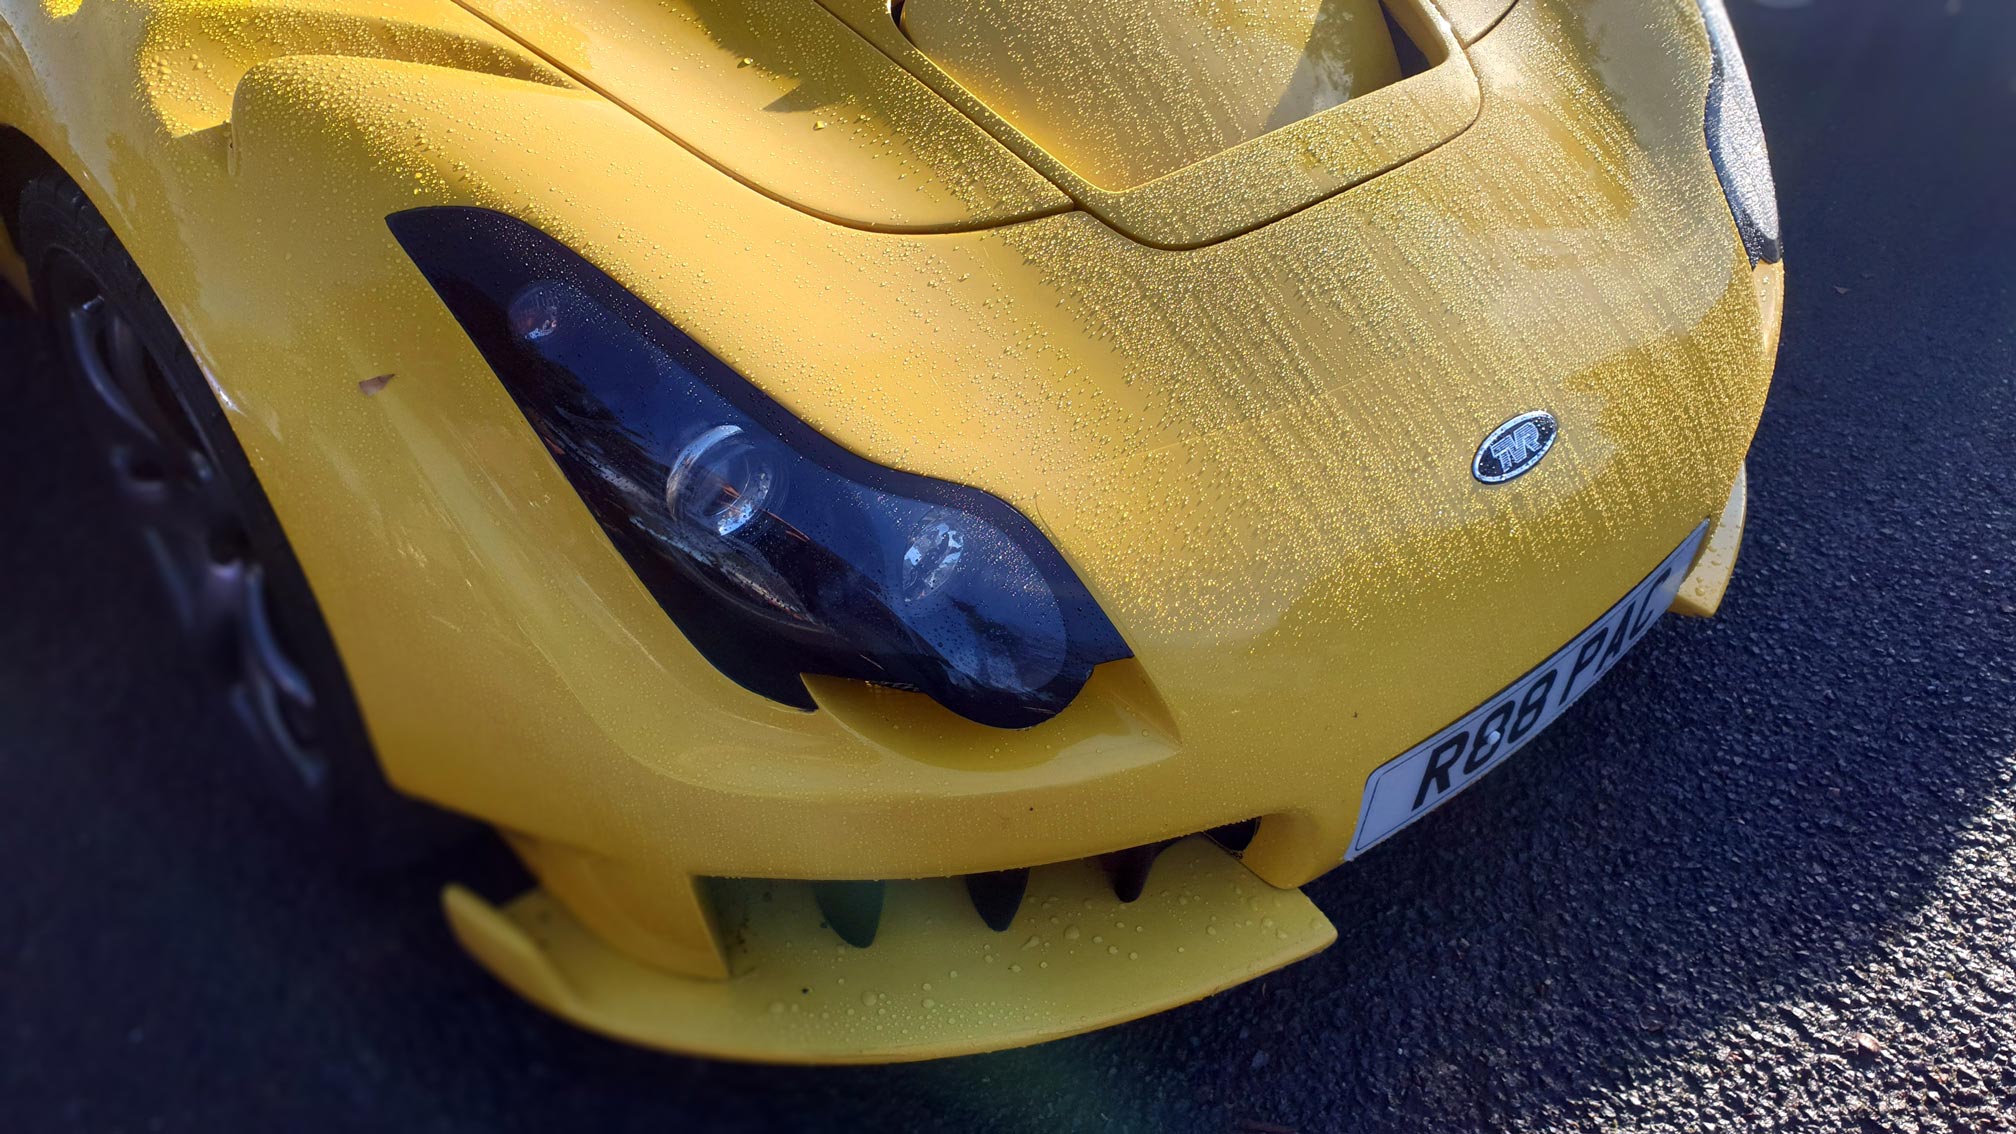 Yellow TVR sports car front shot